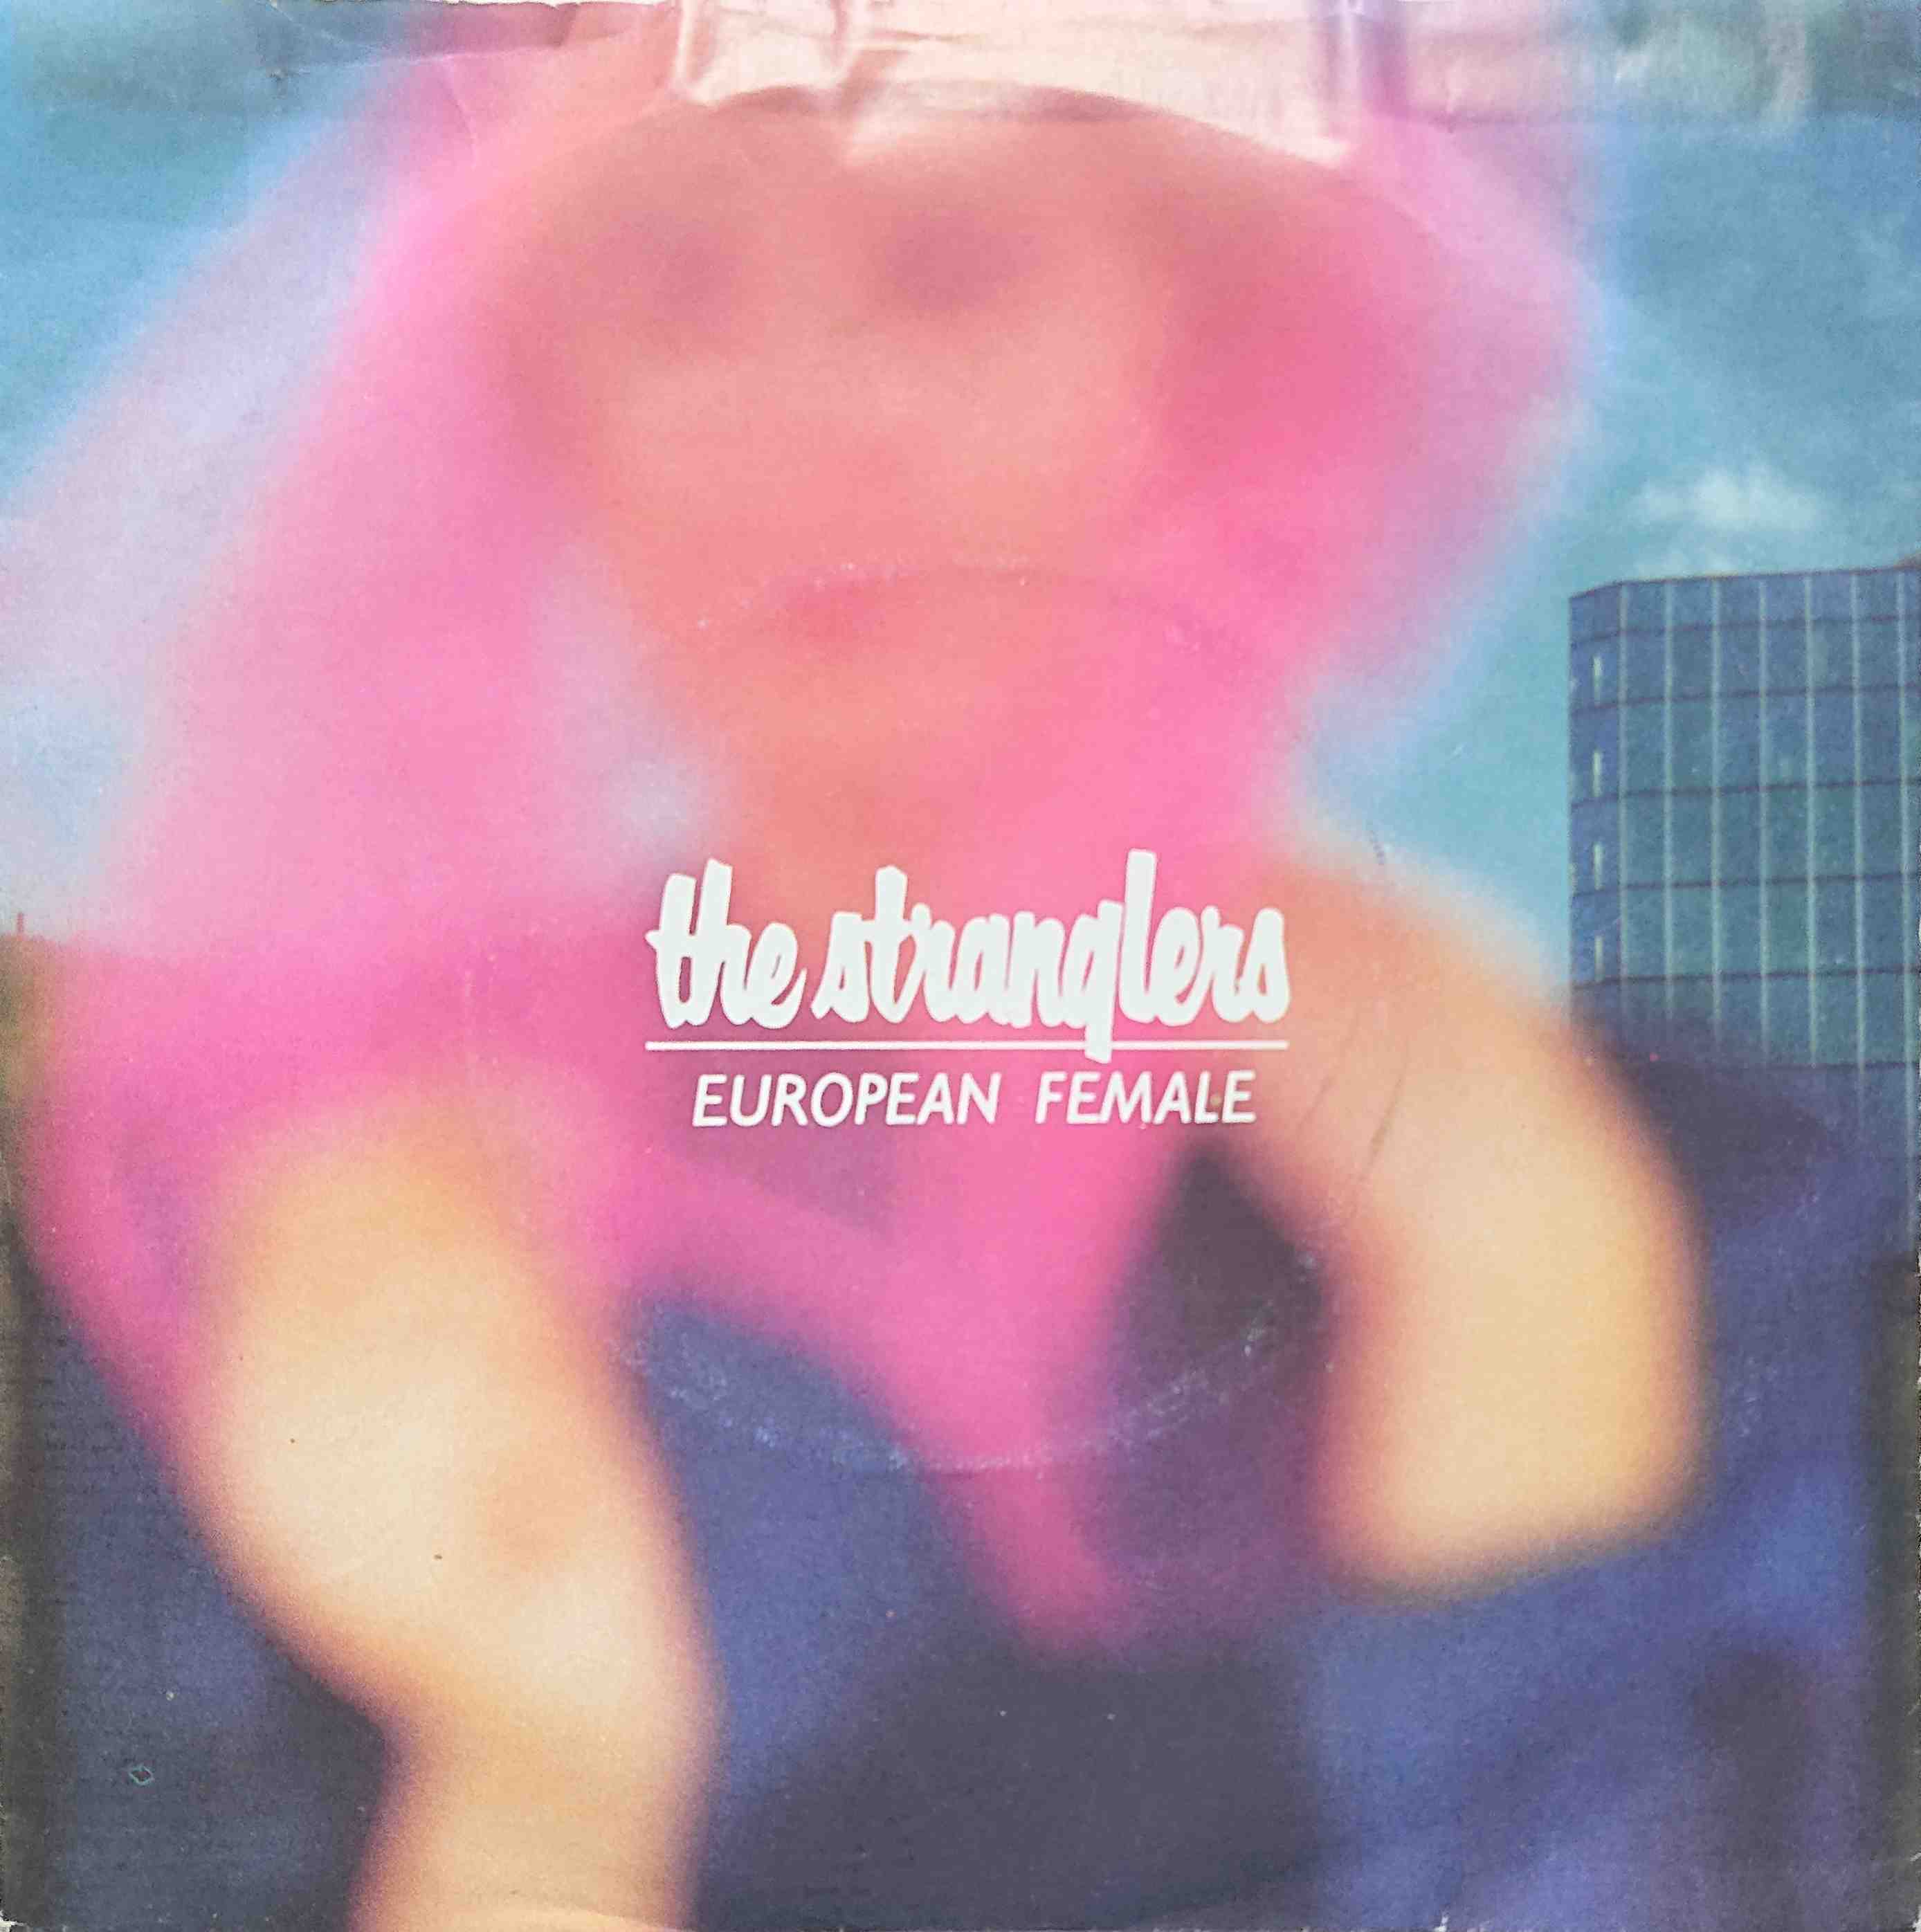 Picture of European female by artist The Stranglers  from The Stranglers singles